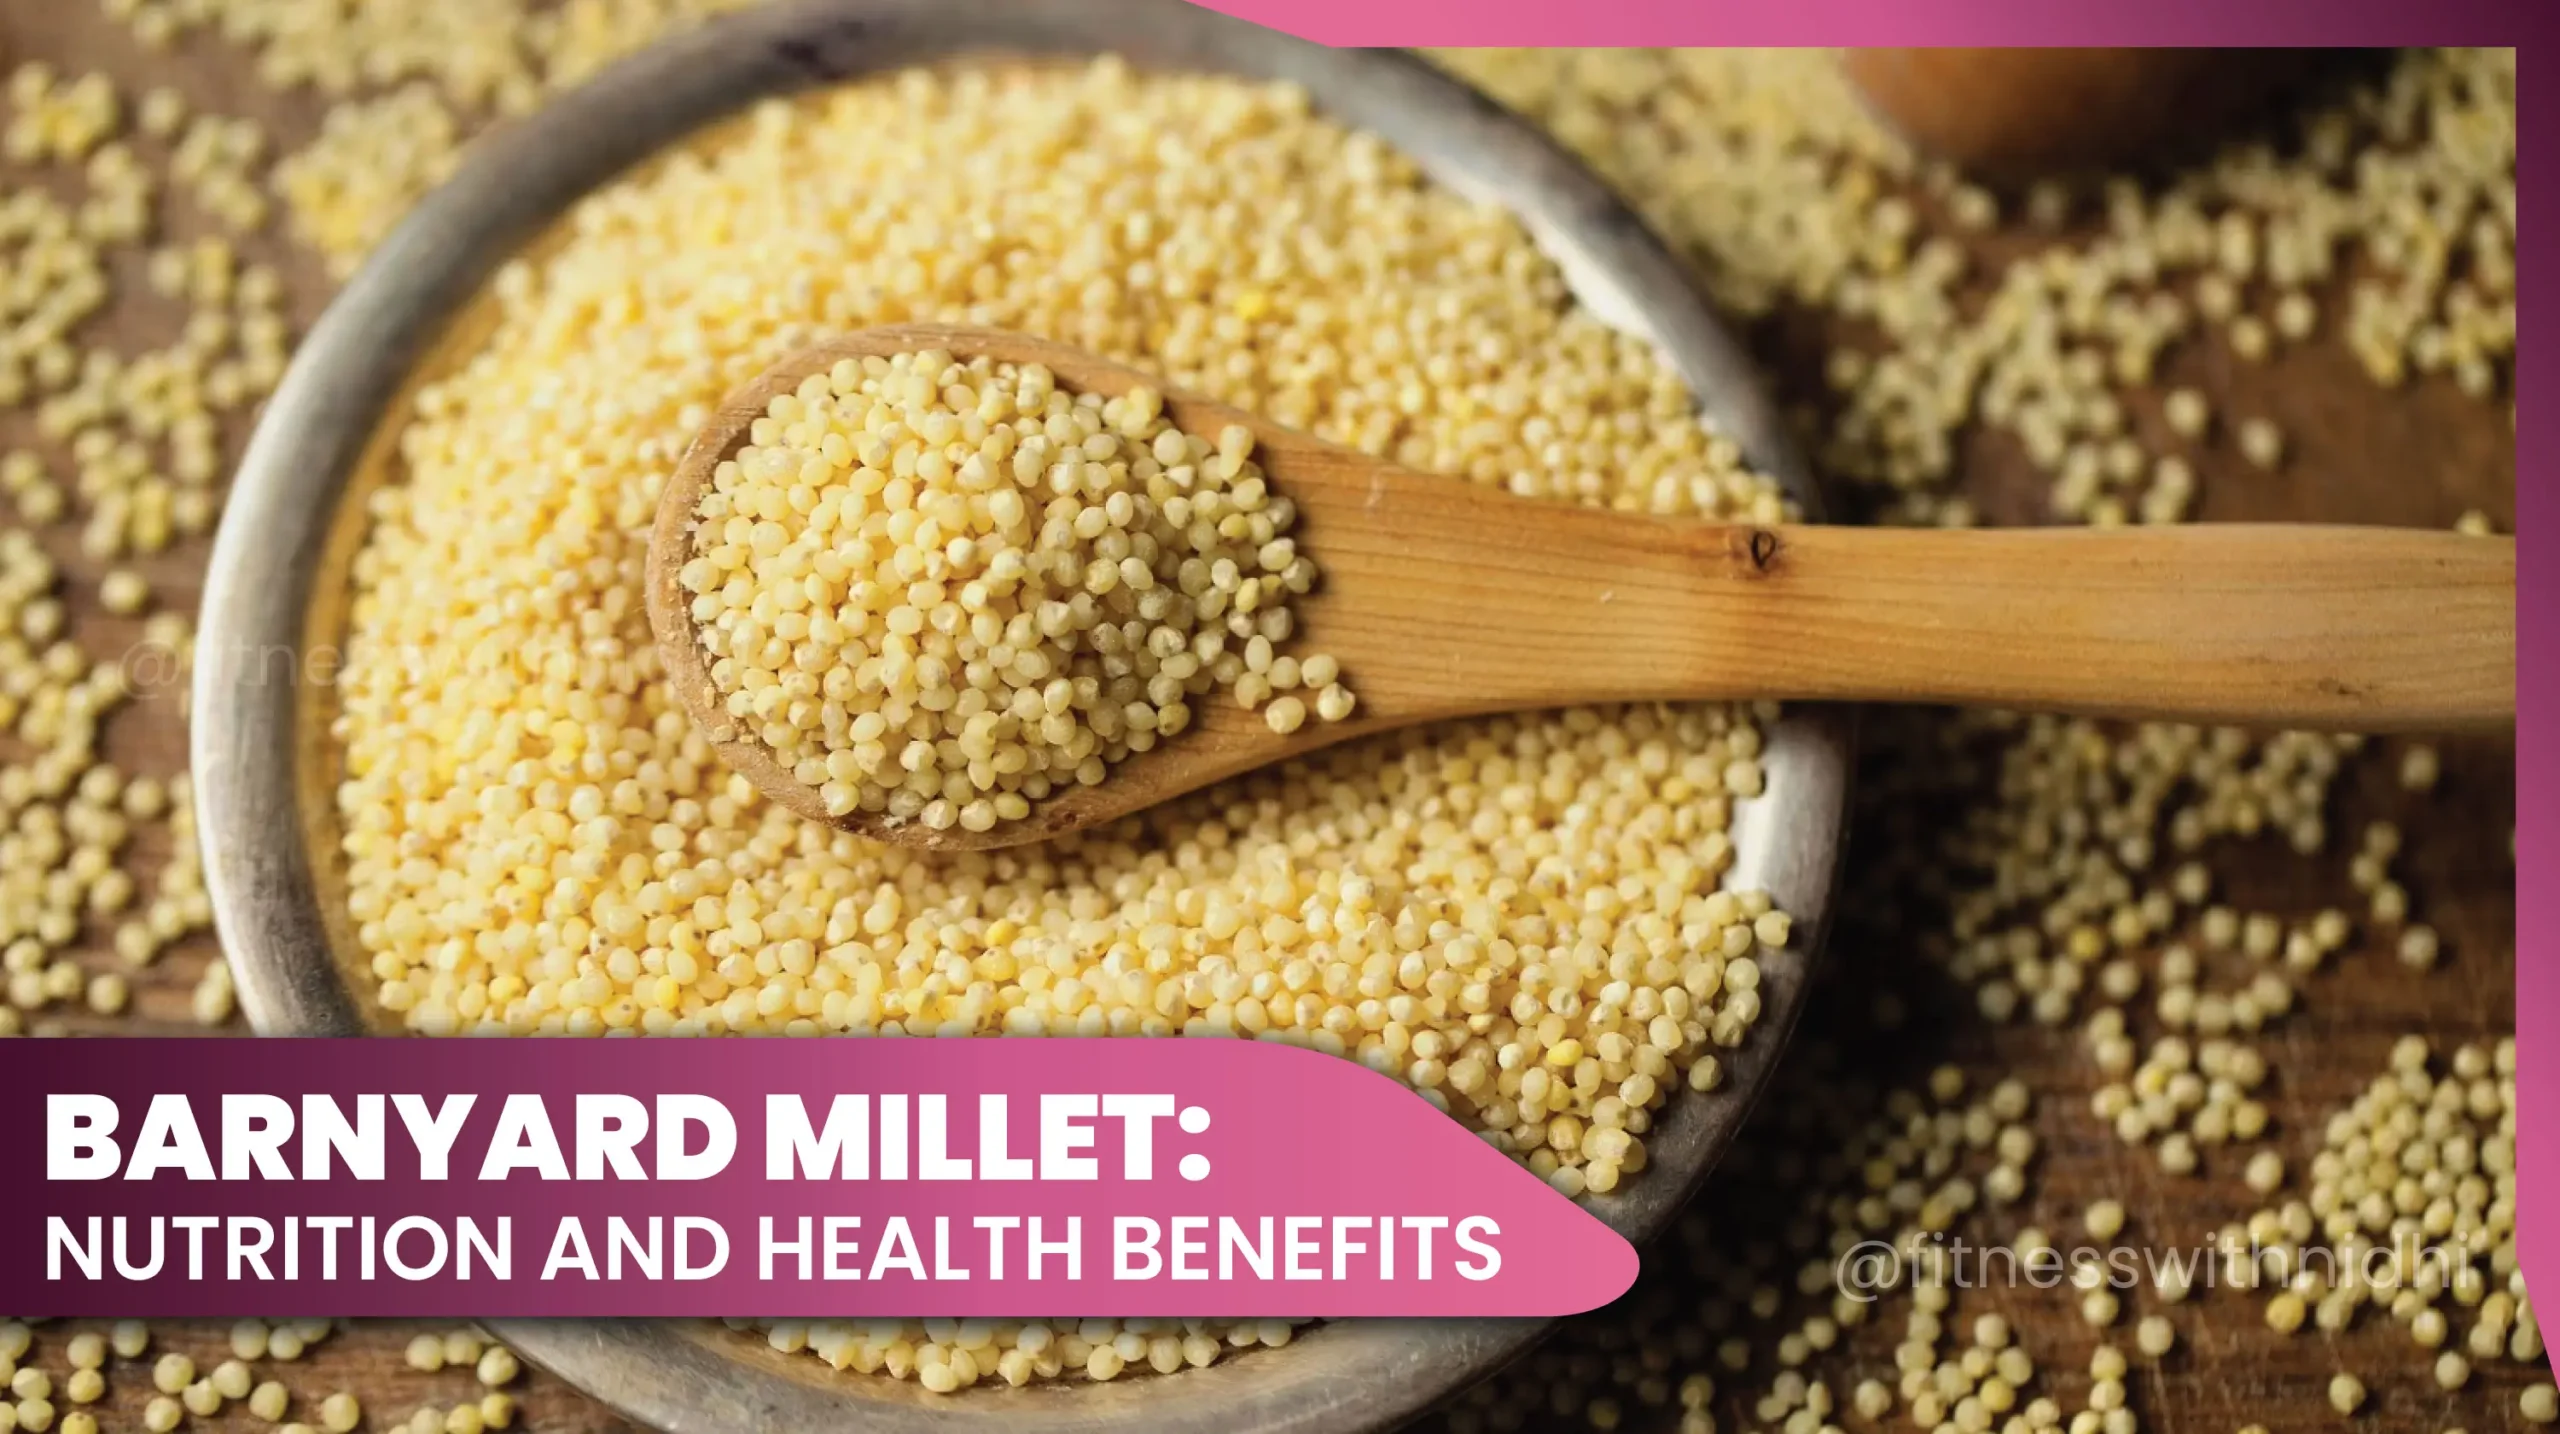 11barnyard millet health benefits, nutritional values and recipes